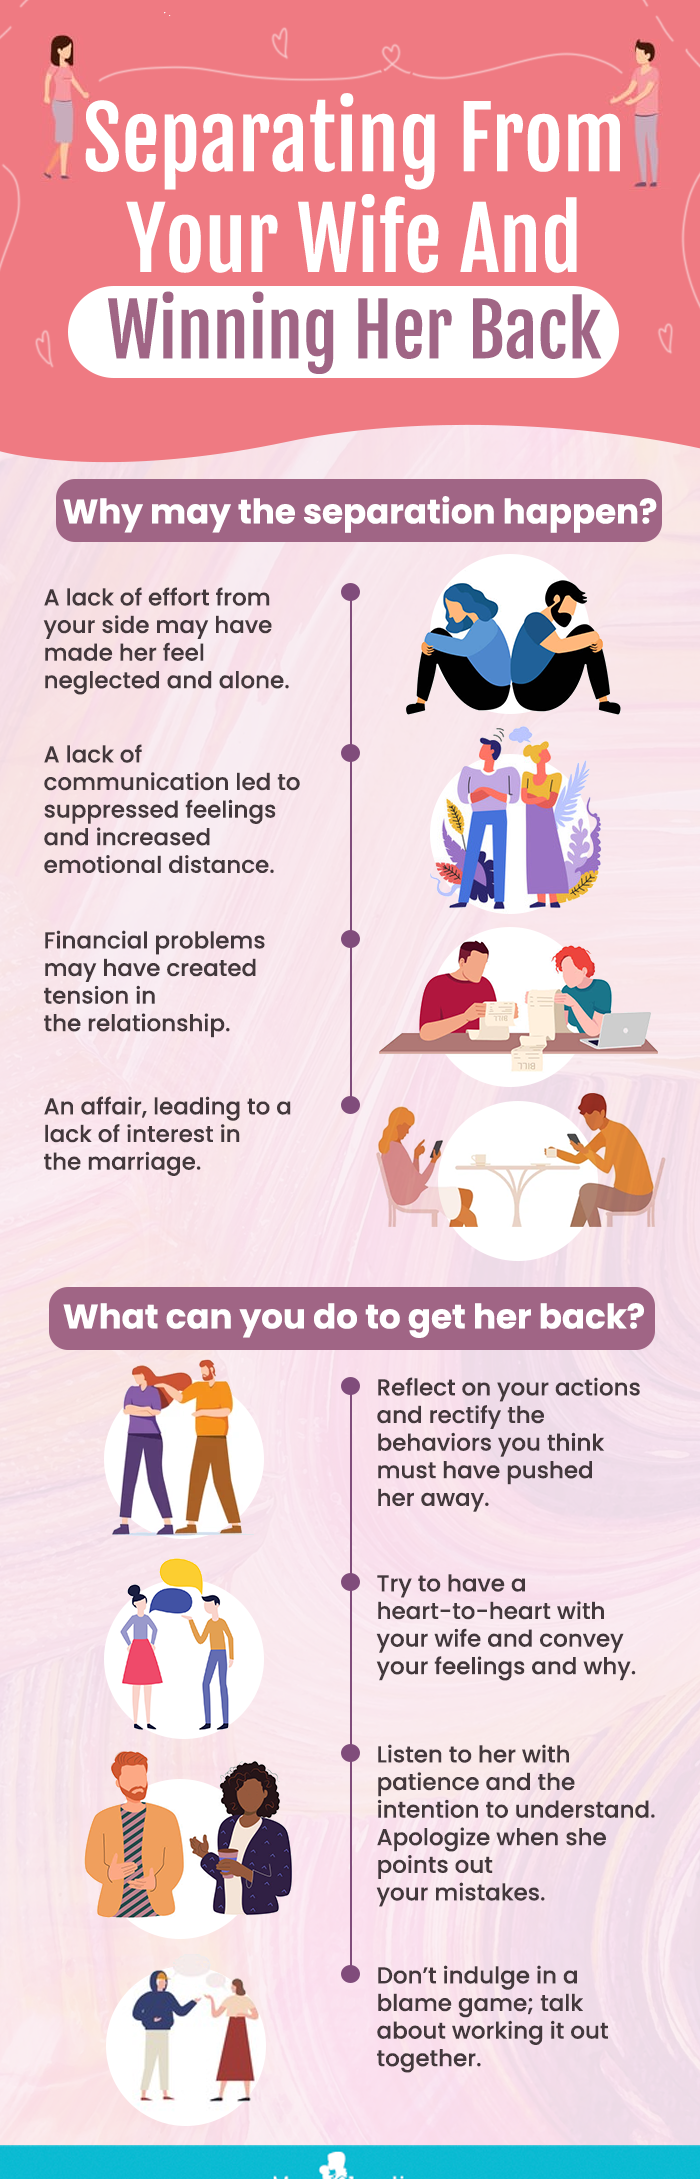 How to Stay Strong During Marriage Separation?